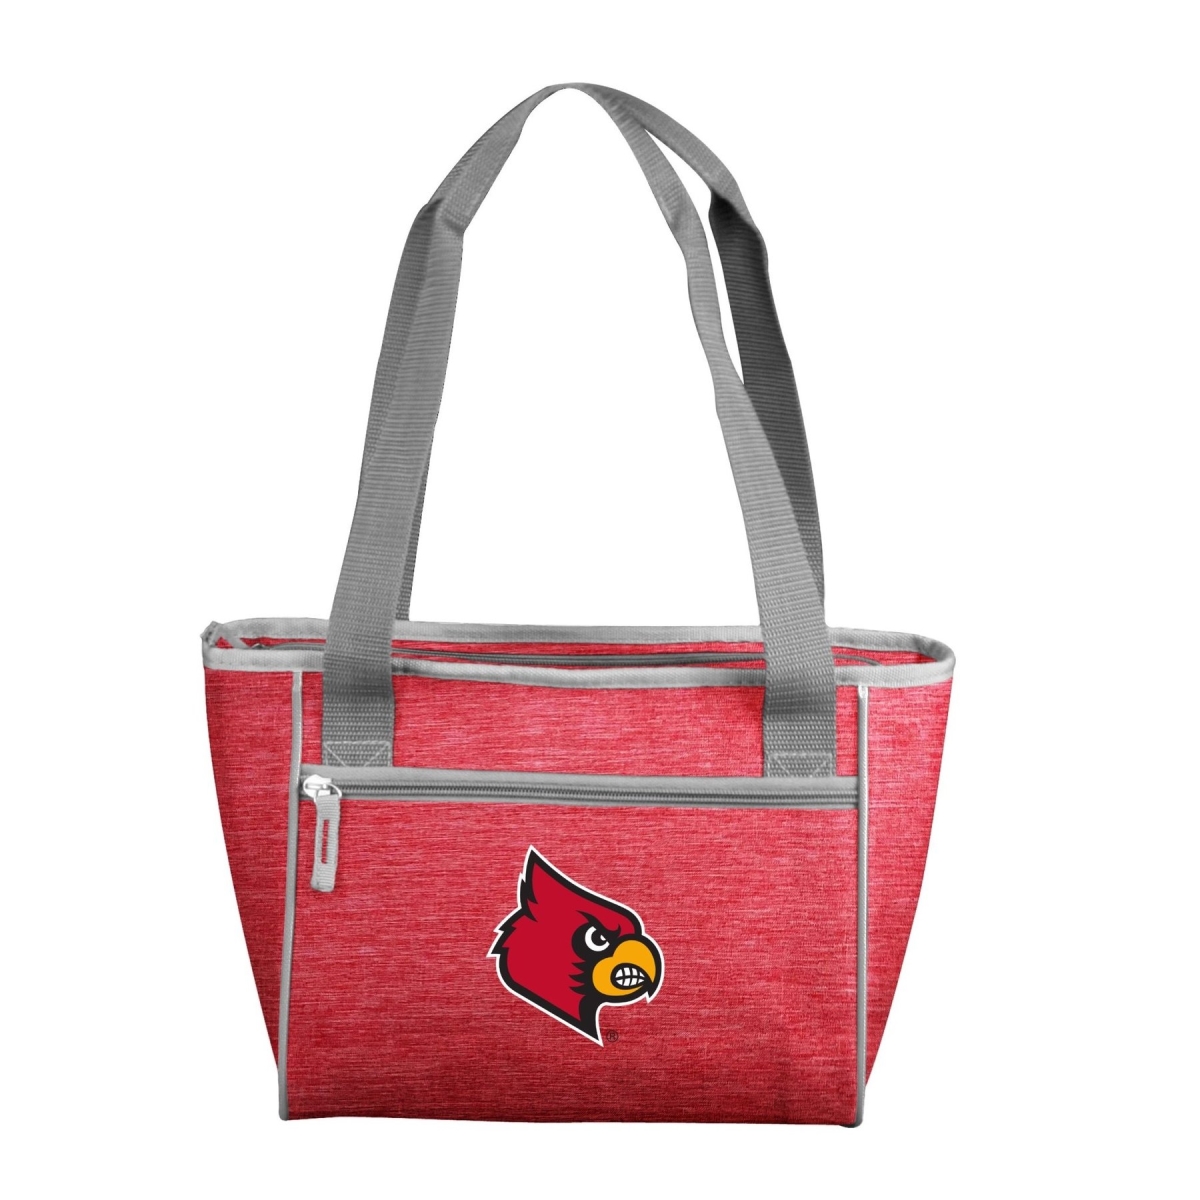 Picture of Logo Chair 161-83-CR1 NCAA Louisville Cardinals Crosshatch Cooler Tote Bag Holds for 16 Cans